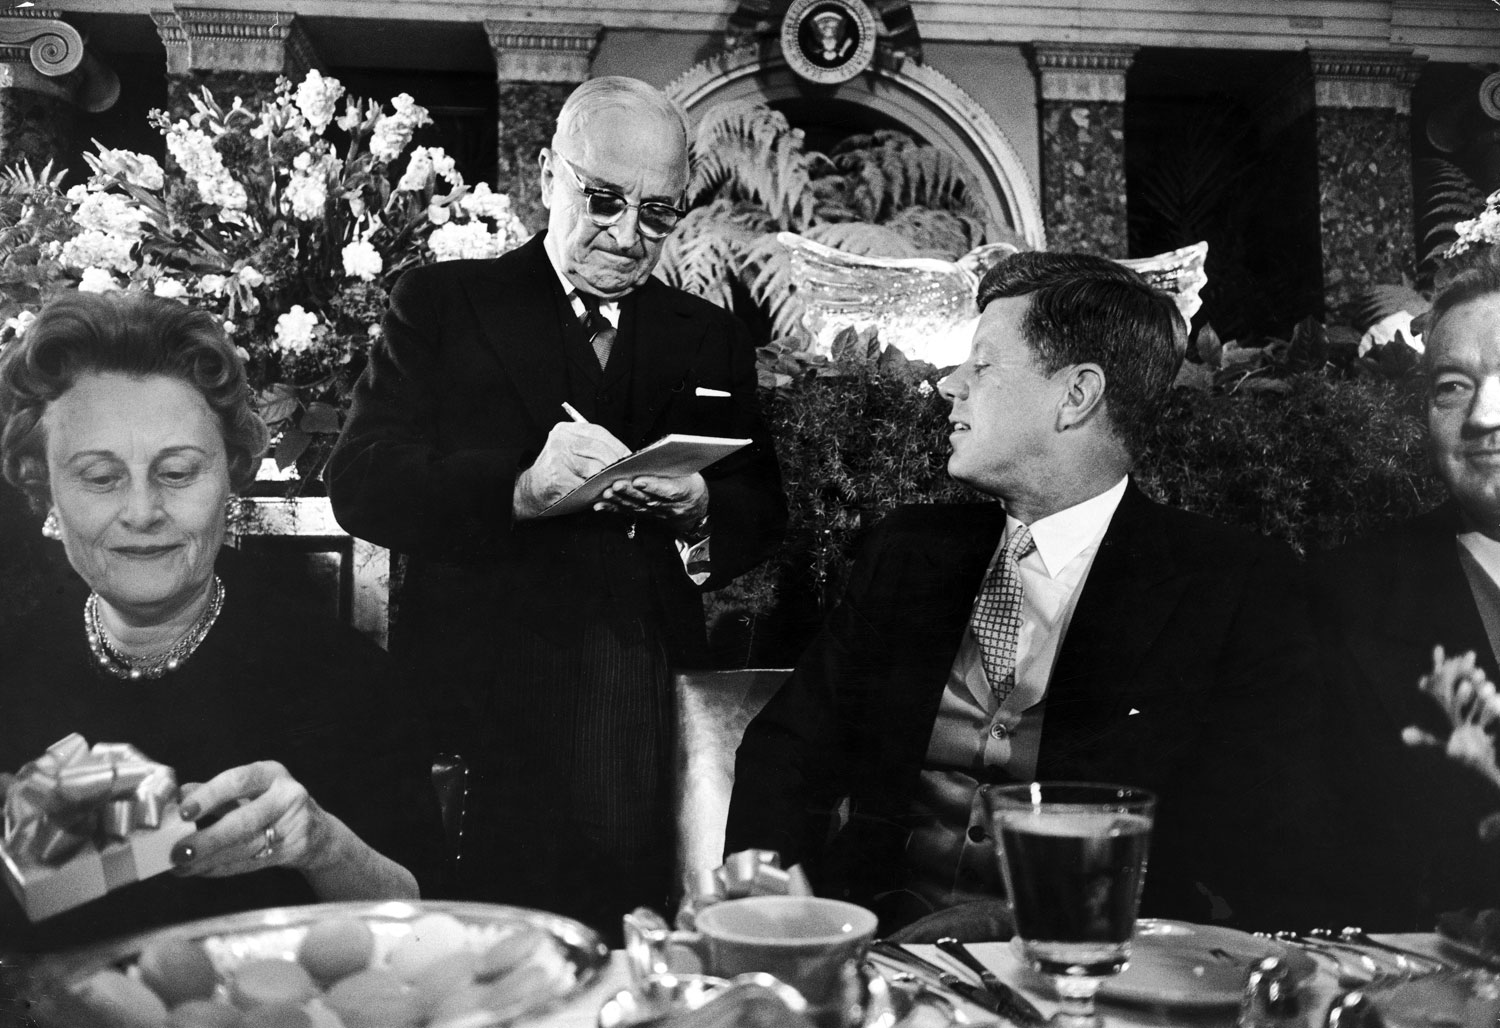 President John Kennedy watches former President Harry Truman sign an autograph for him at the inaugural luncheon, 1961.